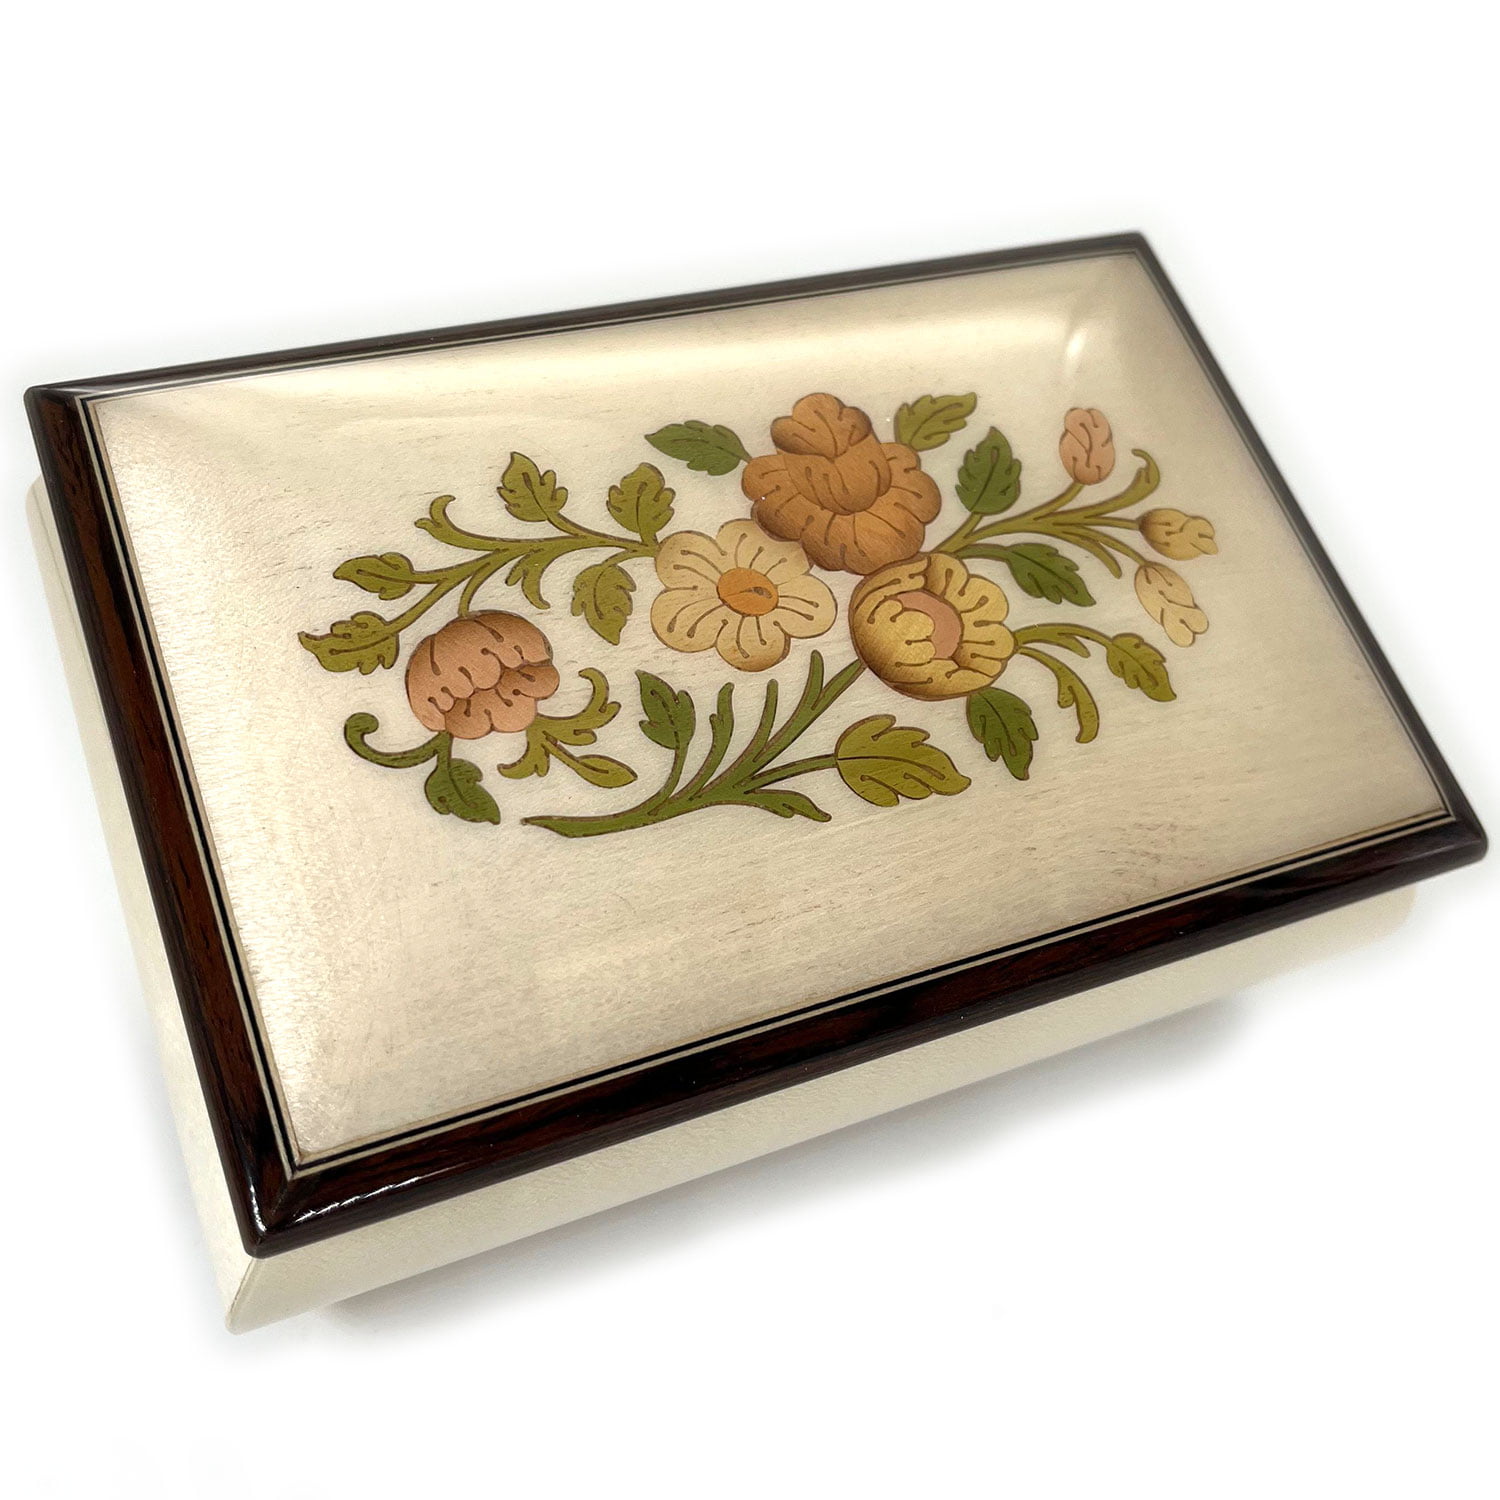 Italian Music Box with Floral Inlay